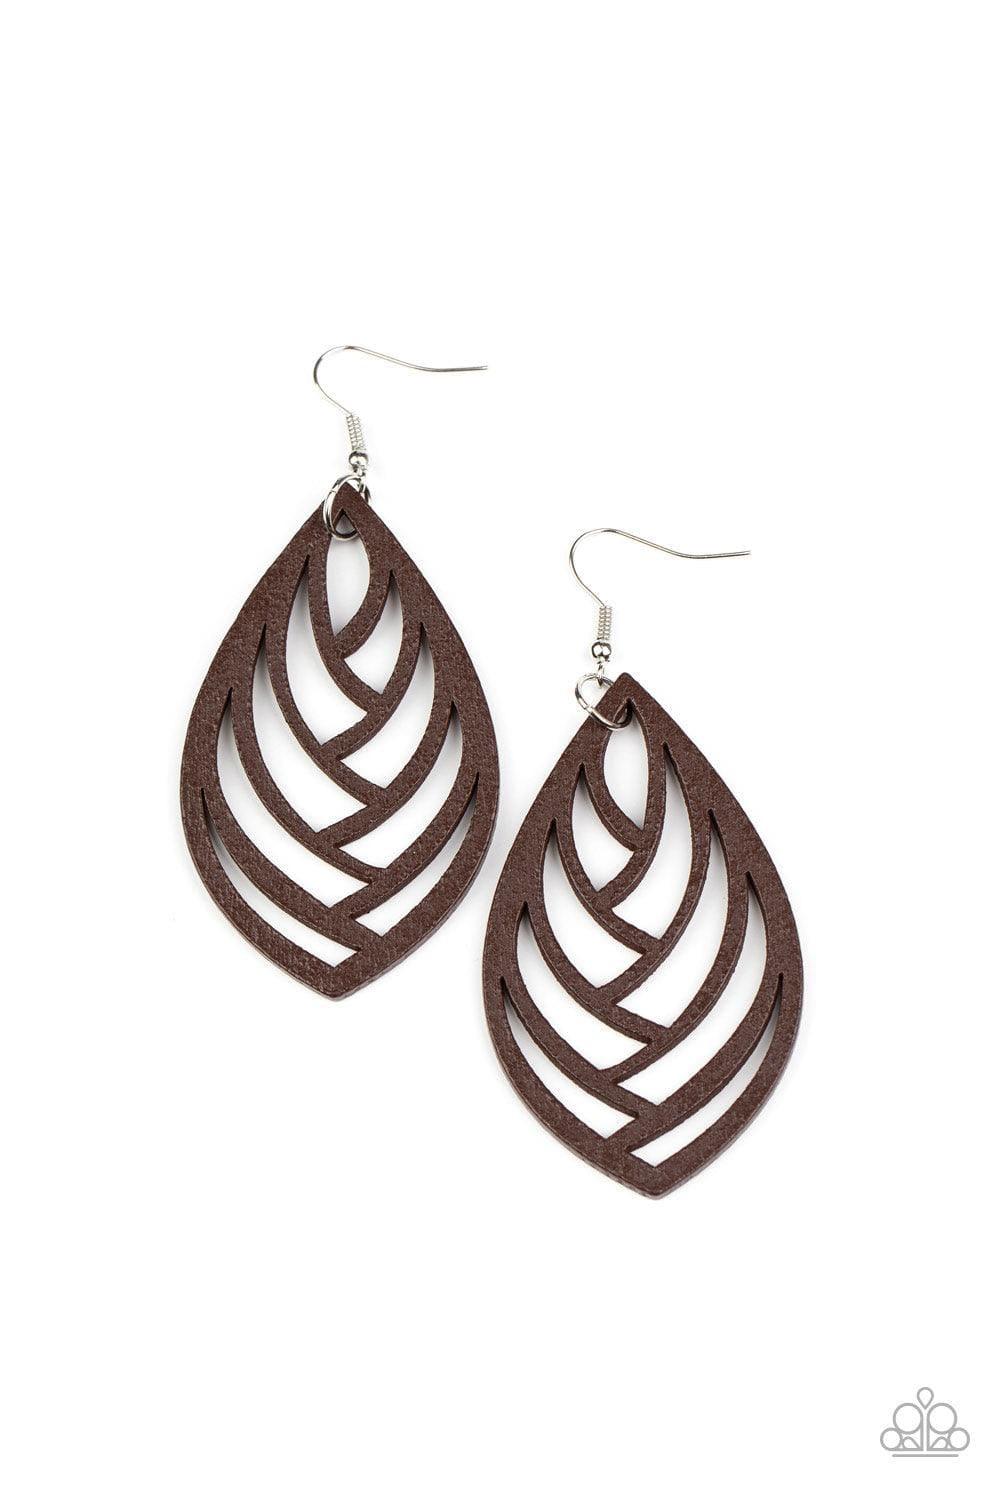 Paparazzi Accessories - Out Of The Woodwork - Brown Earrings - Bling by JessieK